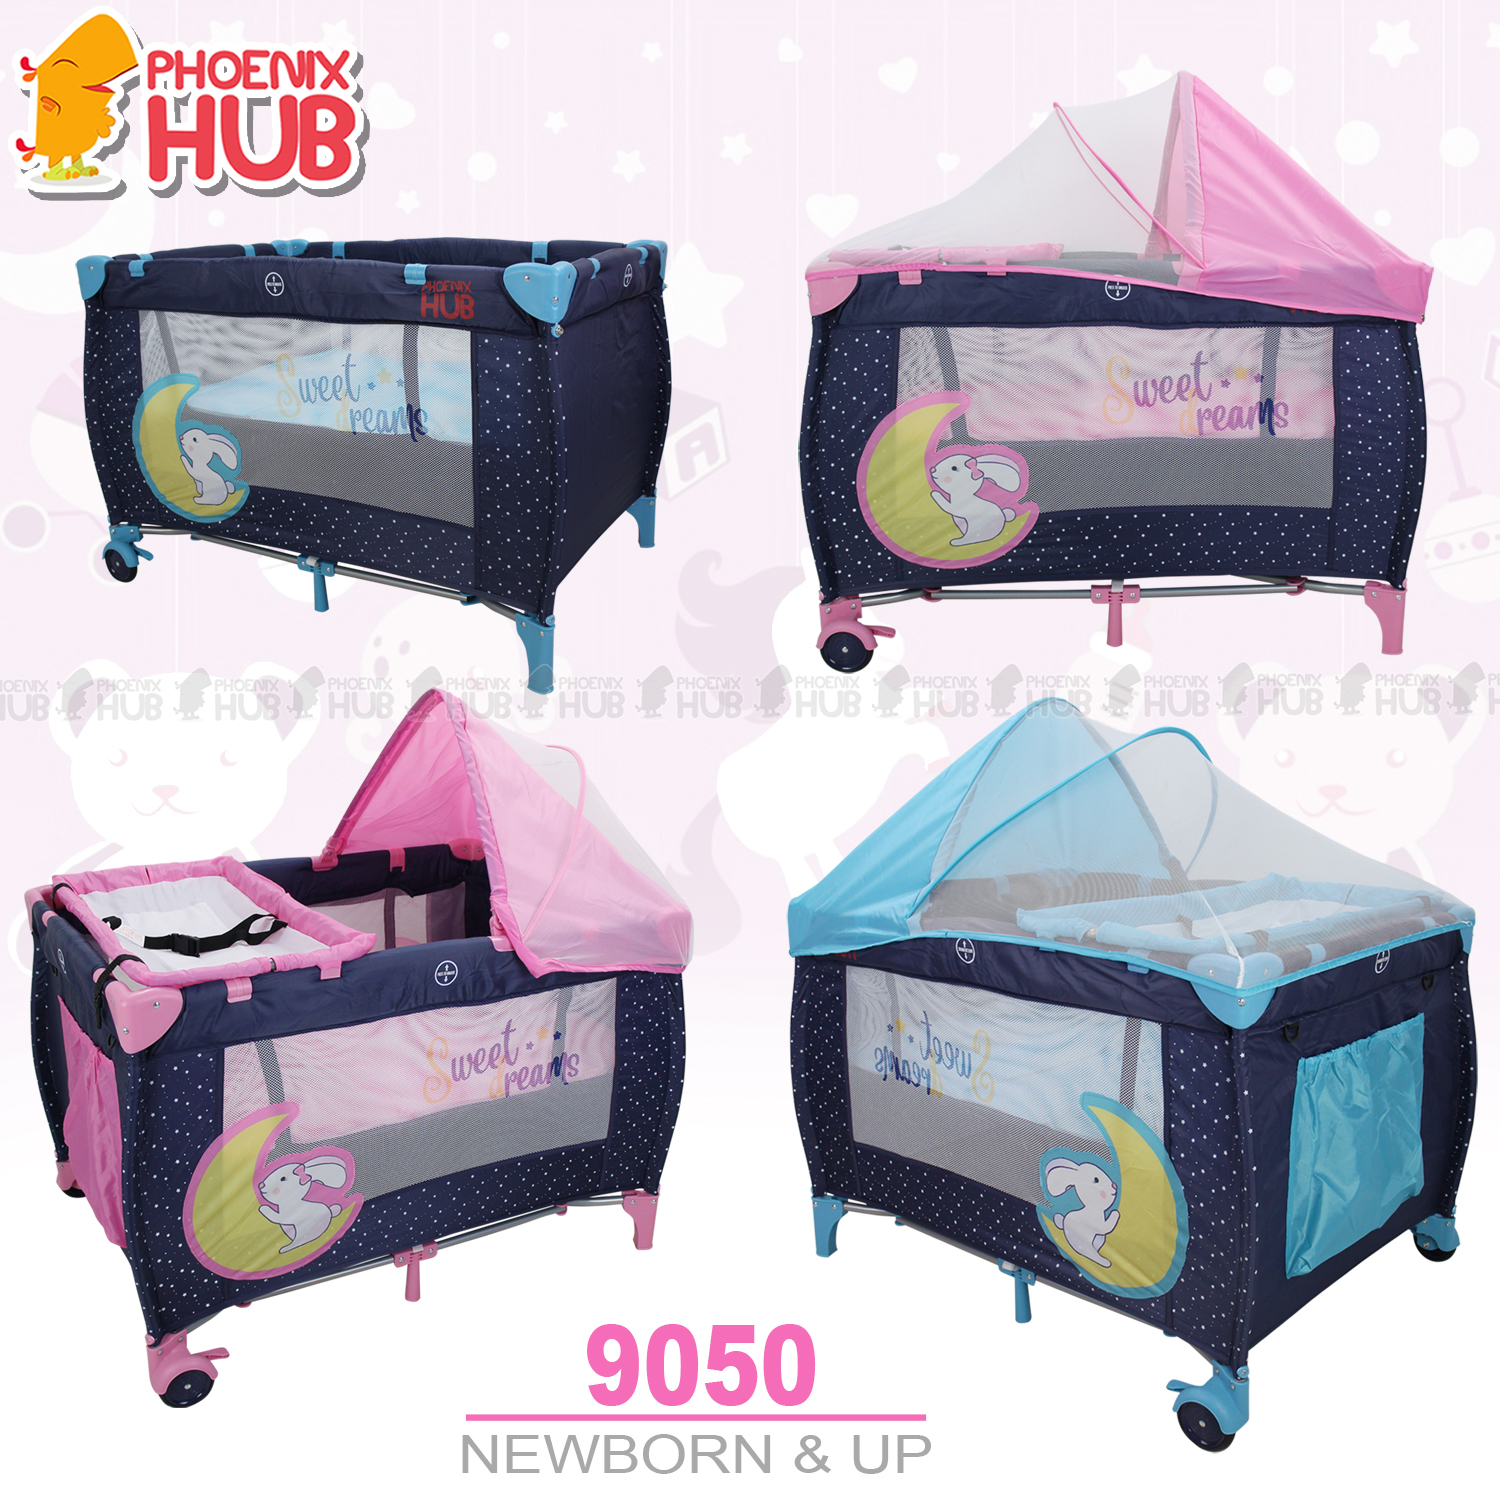 Phoenix Hub Baby Crib Playpen with Mosquito Net and Changing Station